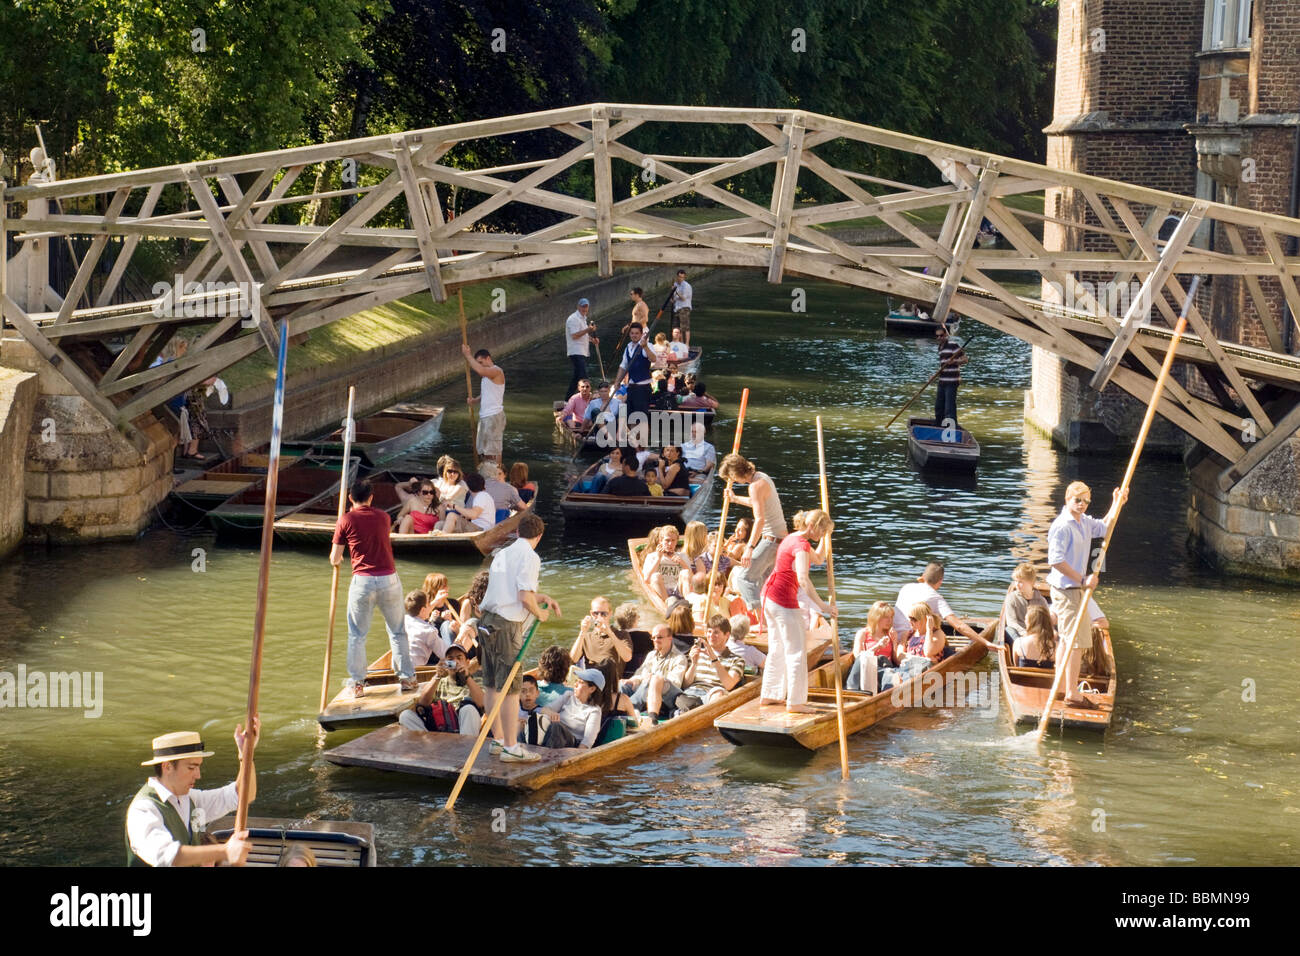 Cambridge summer; Punting on the River Cam at Newtons Mathematical Bridge, Queens College, Cambridge, UK on a sunny summers day Stock Photo